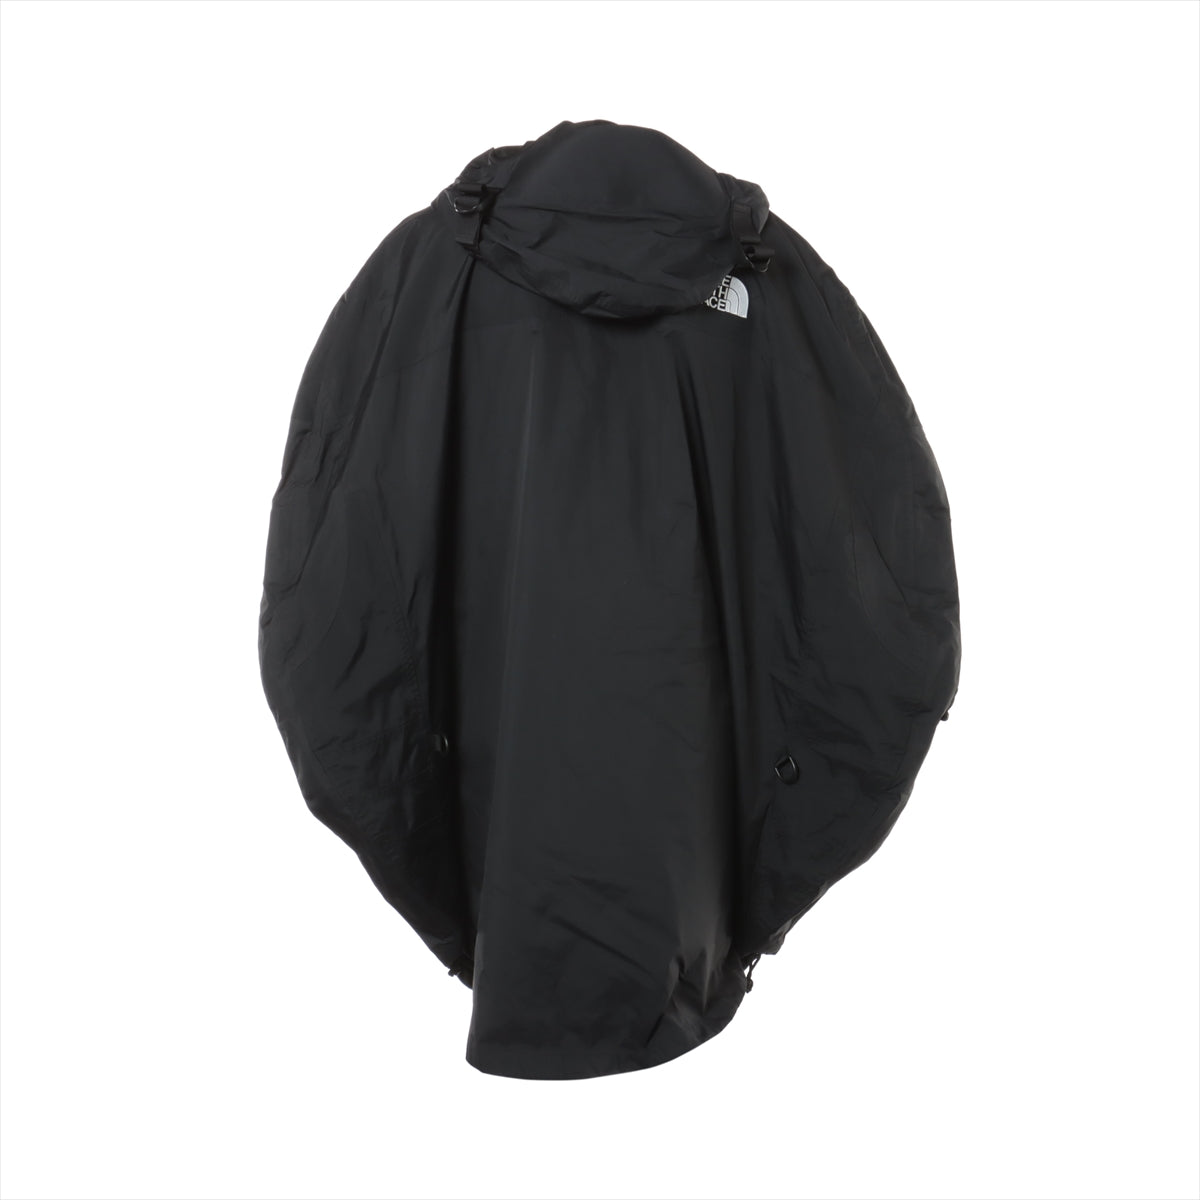 MM6 x The North Face 20AW Polyester & nylon Mountain hoodie S Ladies' Black  S62AN0040 CIRCLE MOUNTAIN JACKET